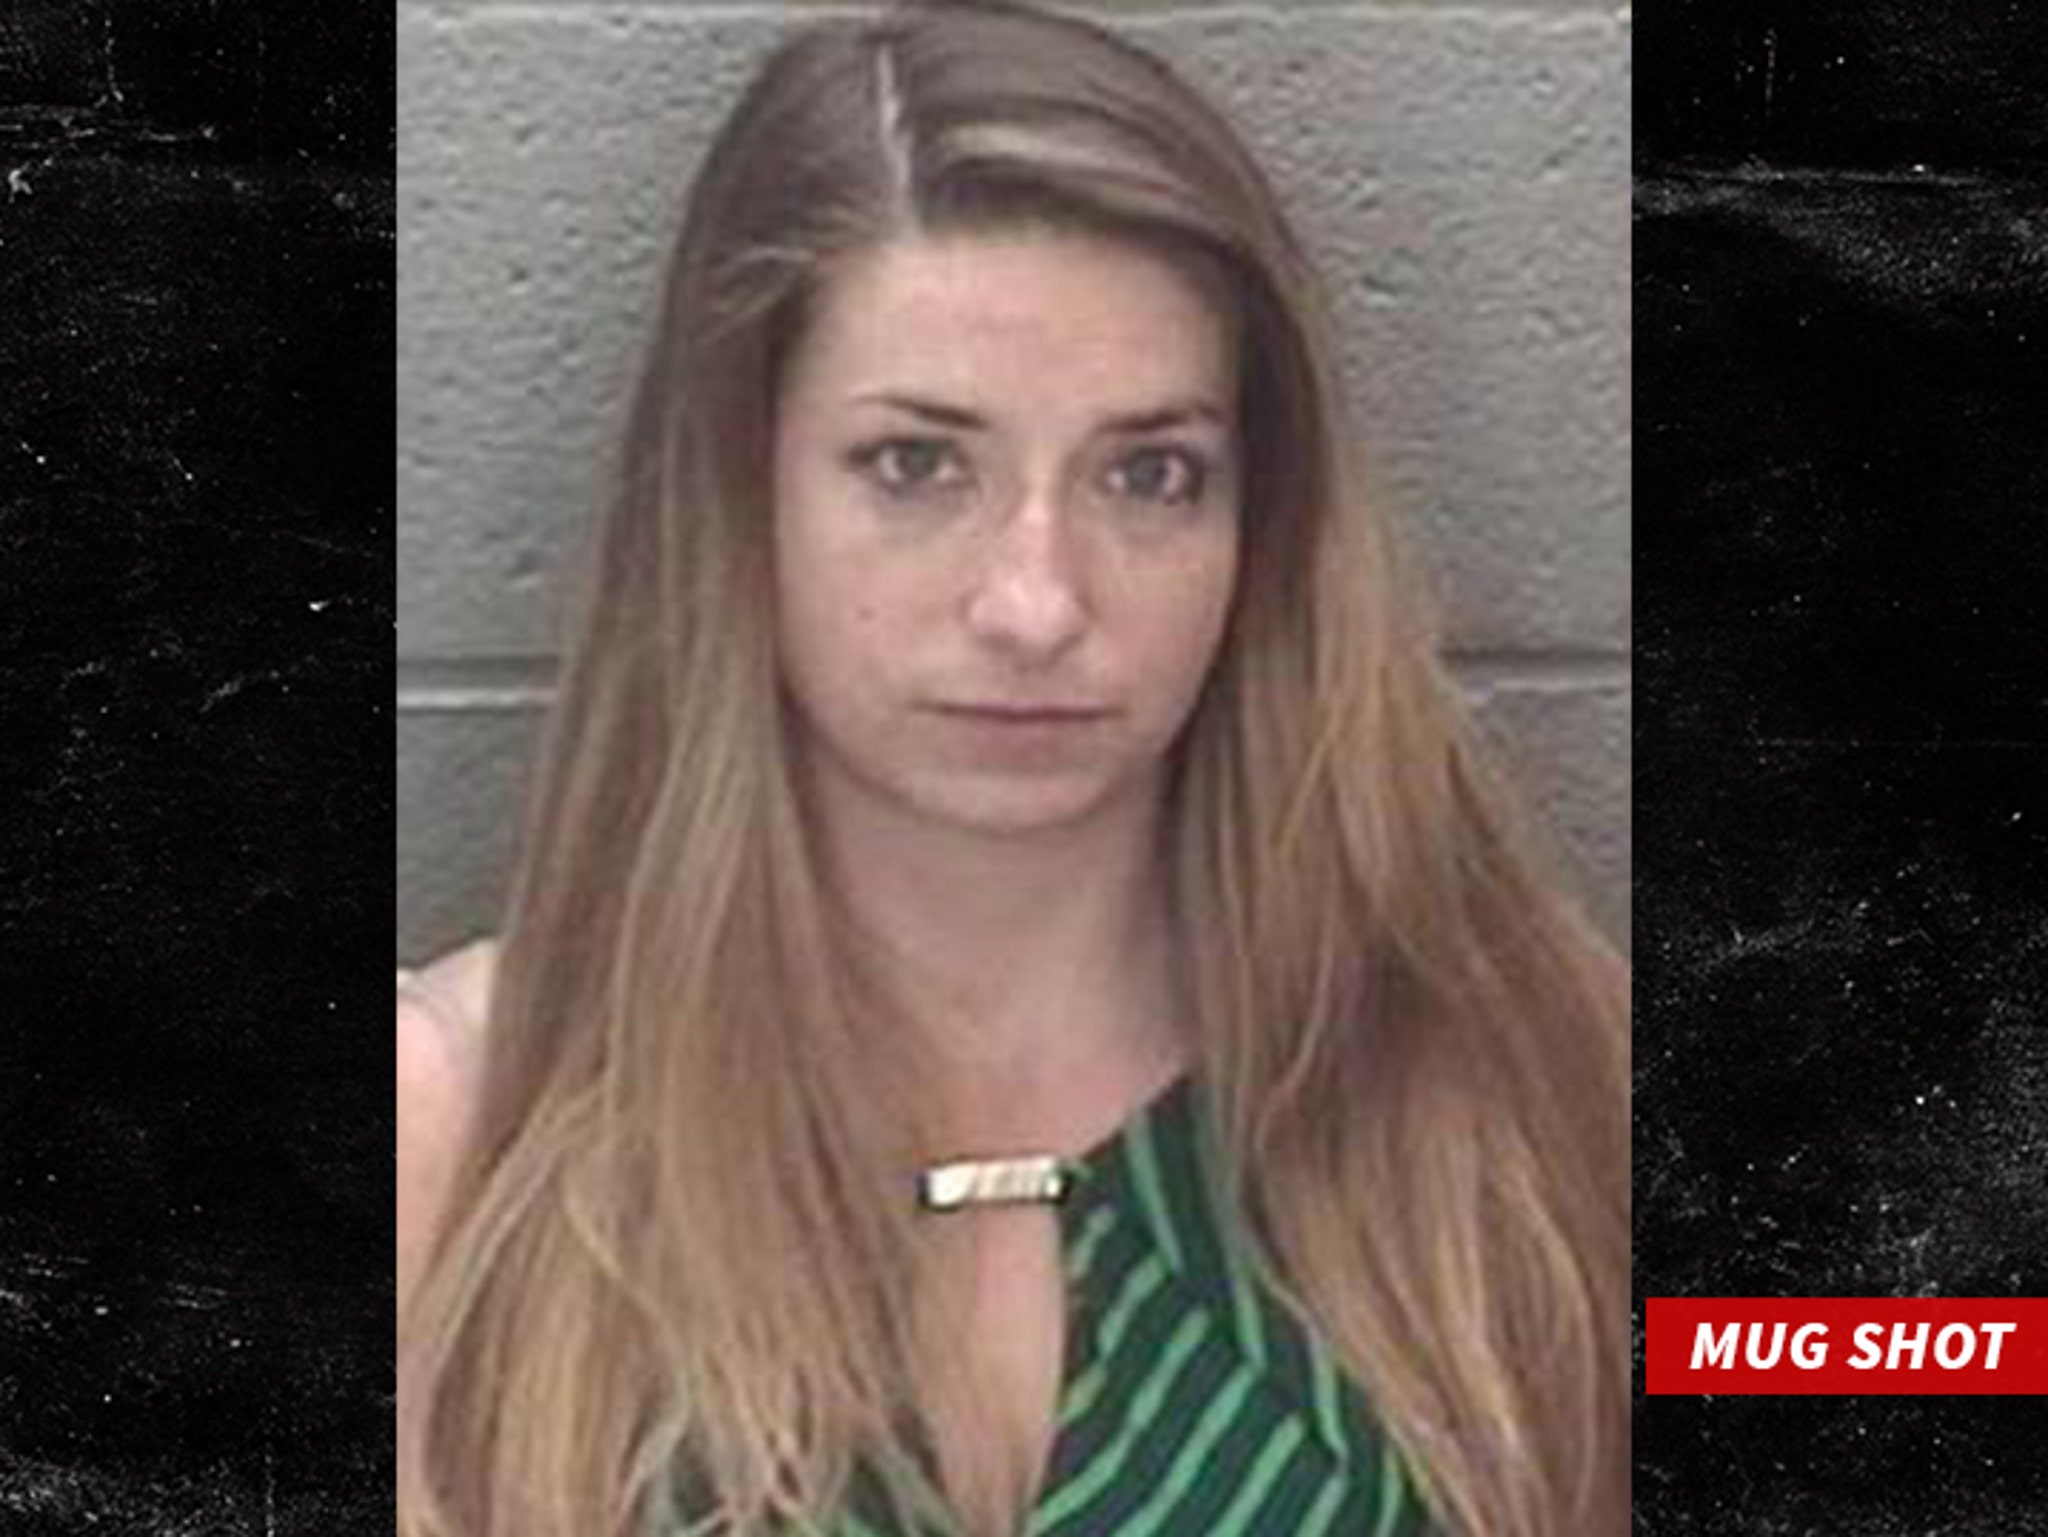 Hot Math Teacher Erin McAuliffe Arrested for Having Sex with 3 Male High School Students pic